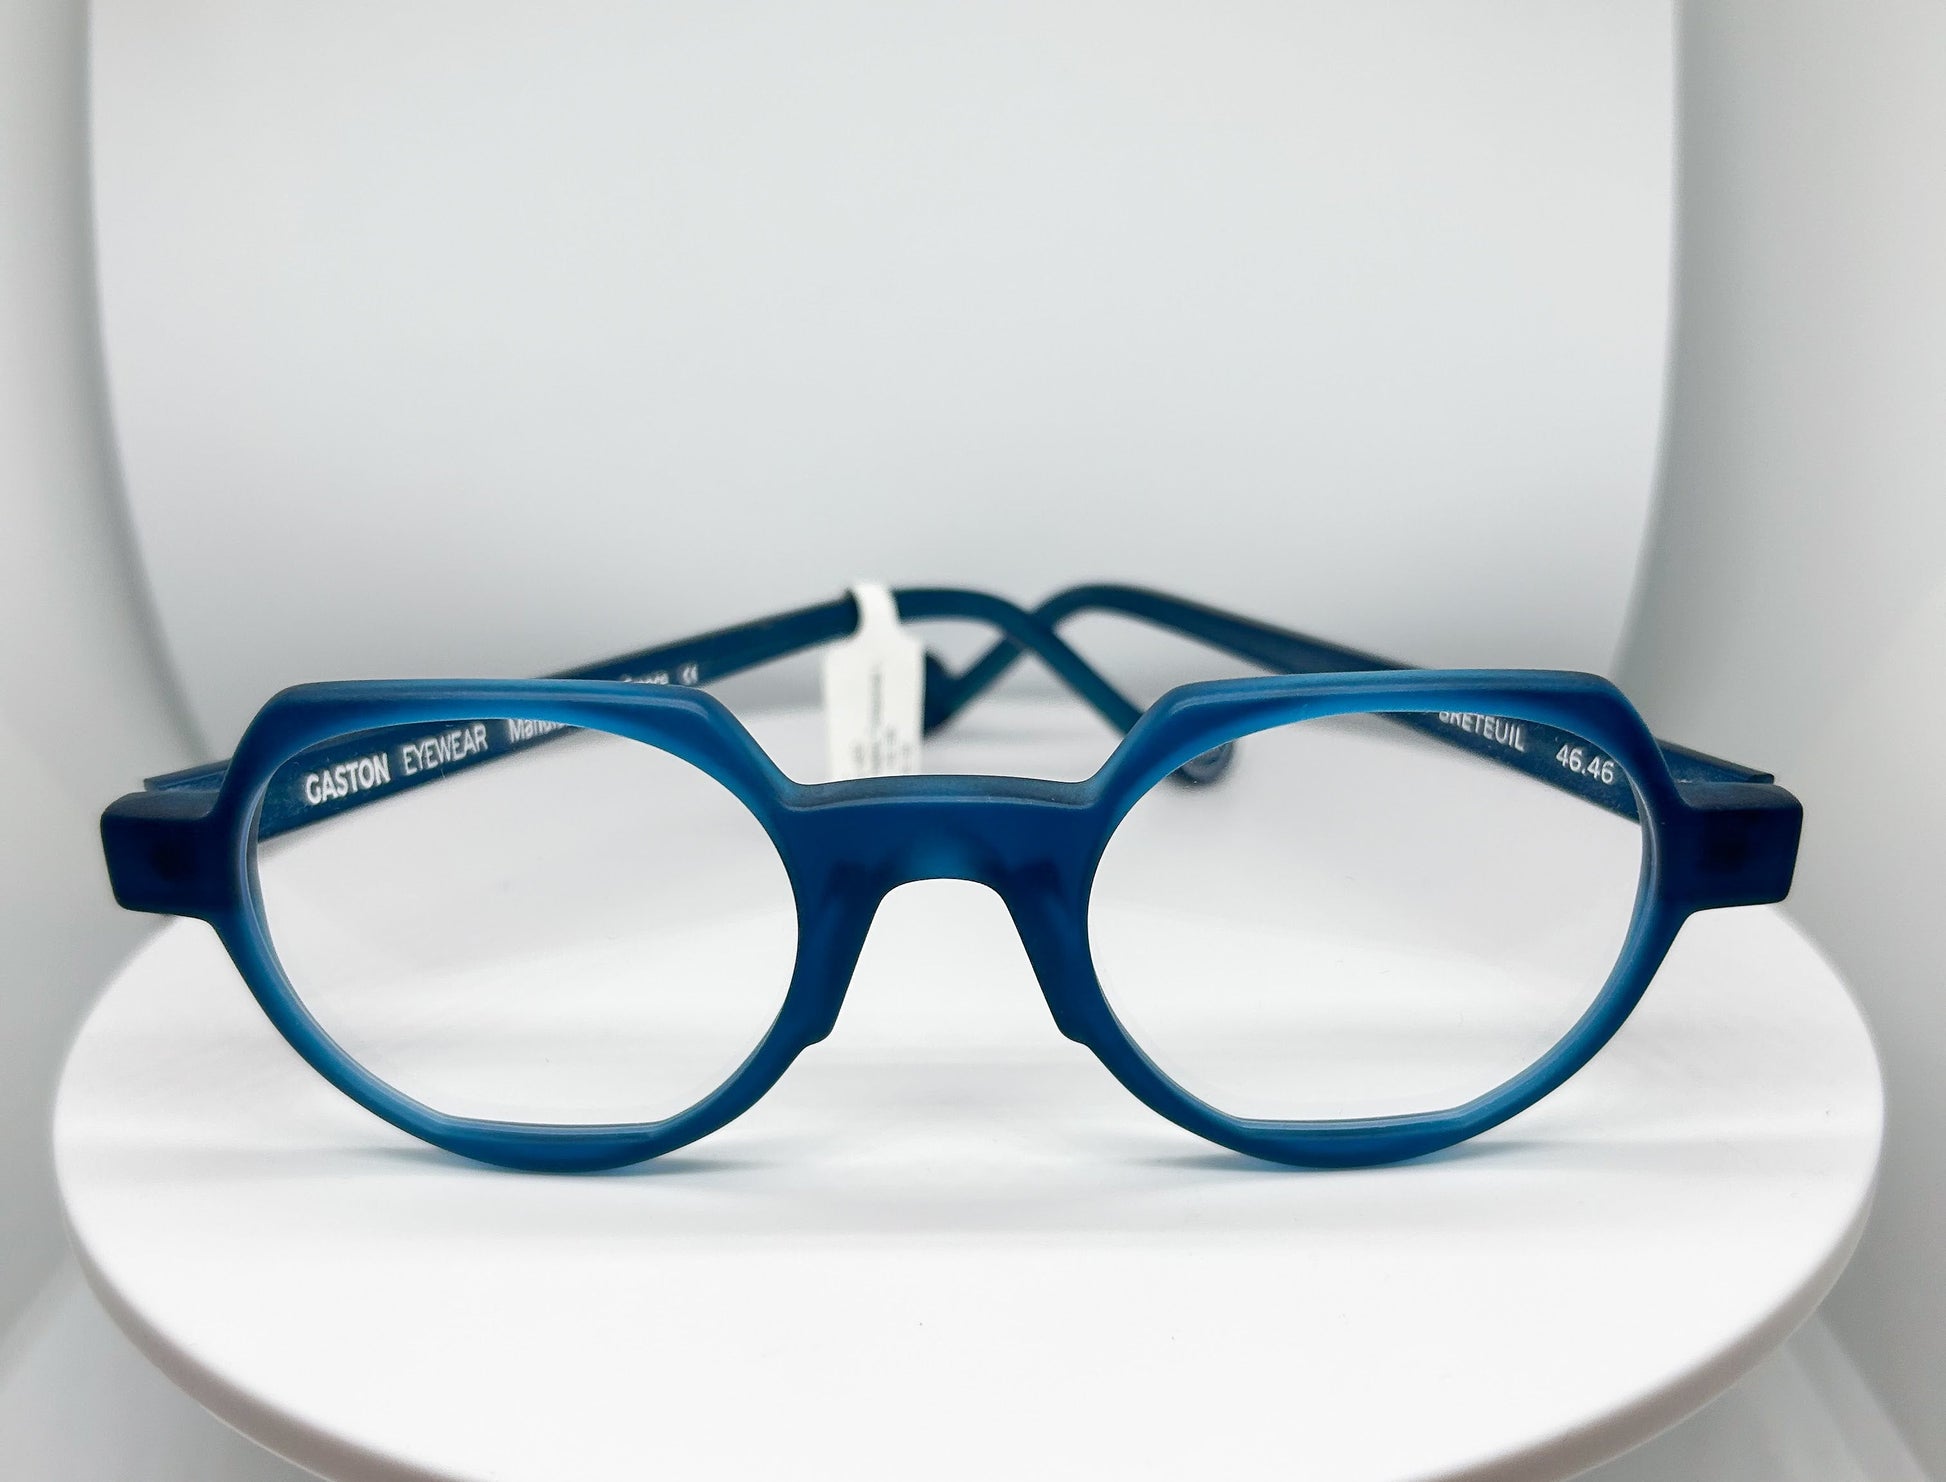 Buy Gaston Eyewear - Breteuil, a  Navy; Acetate Optical Frame with a Round with Flat Top shape. An Authorized Dealer, Adair Eyewear has a 40+ Years History of Customer Service Excellence